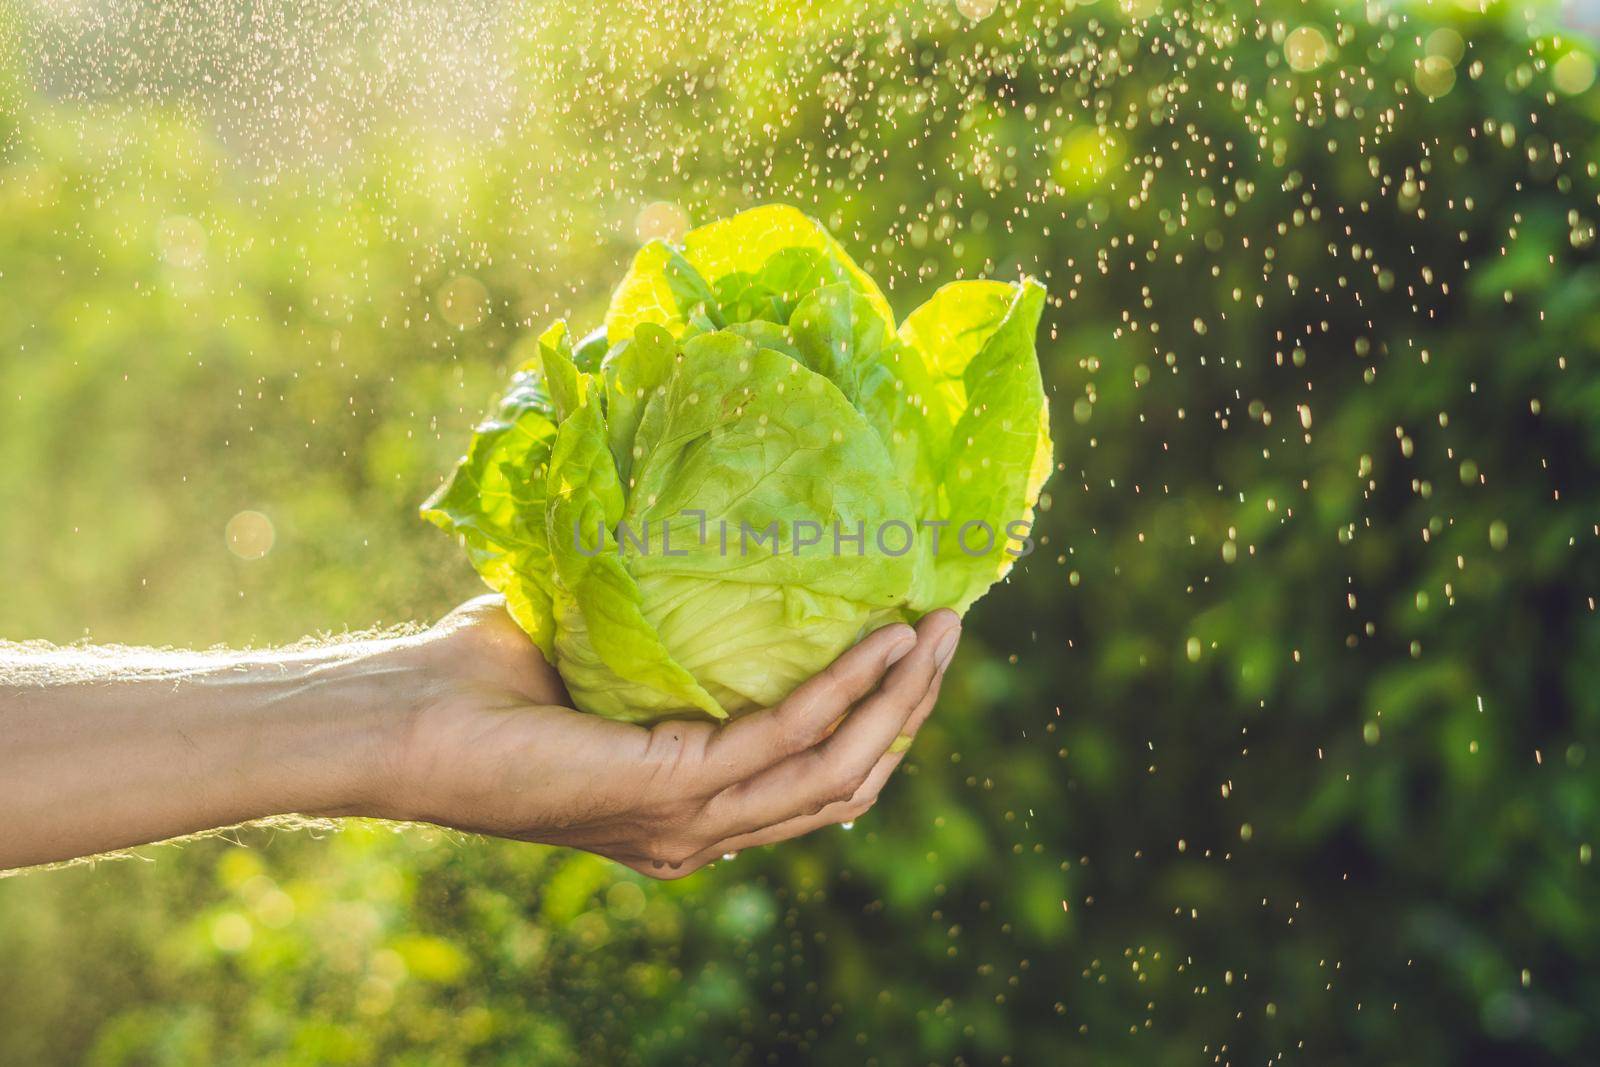 Bunch of lettuce in a hand of a man with a splashes of water in air.